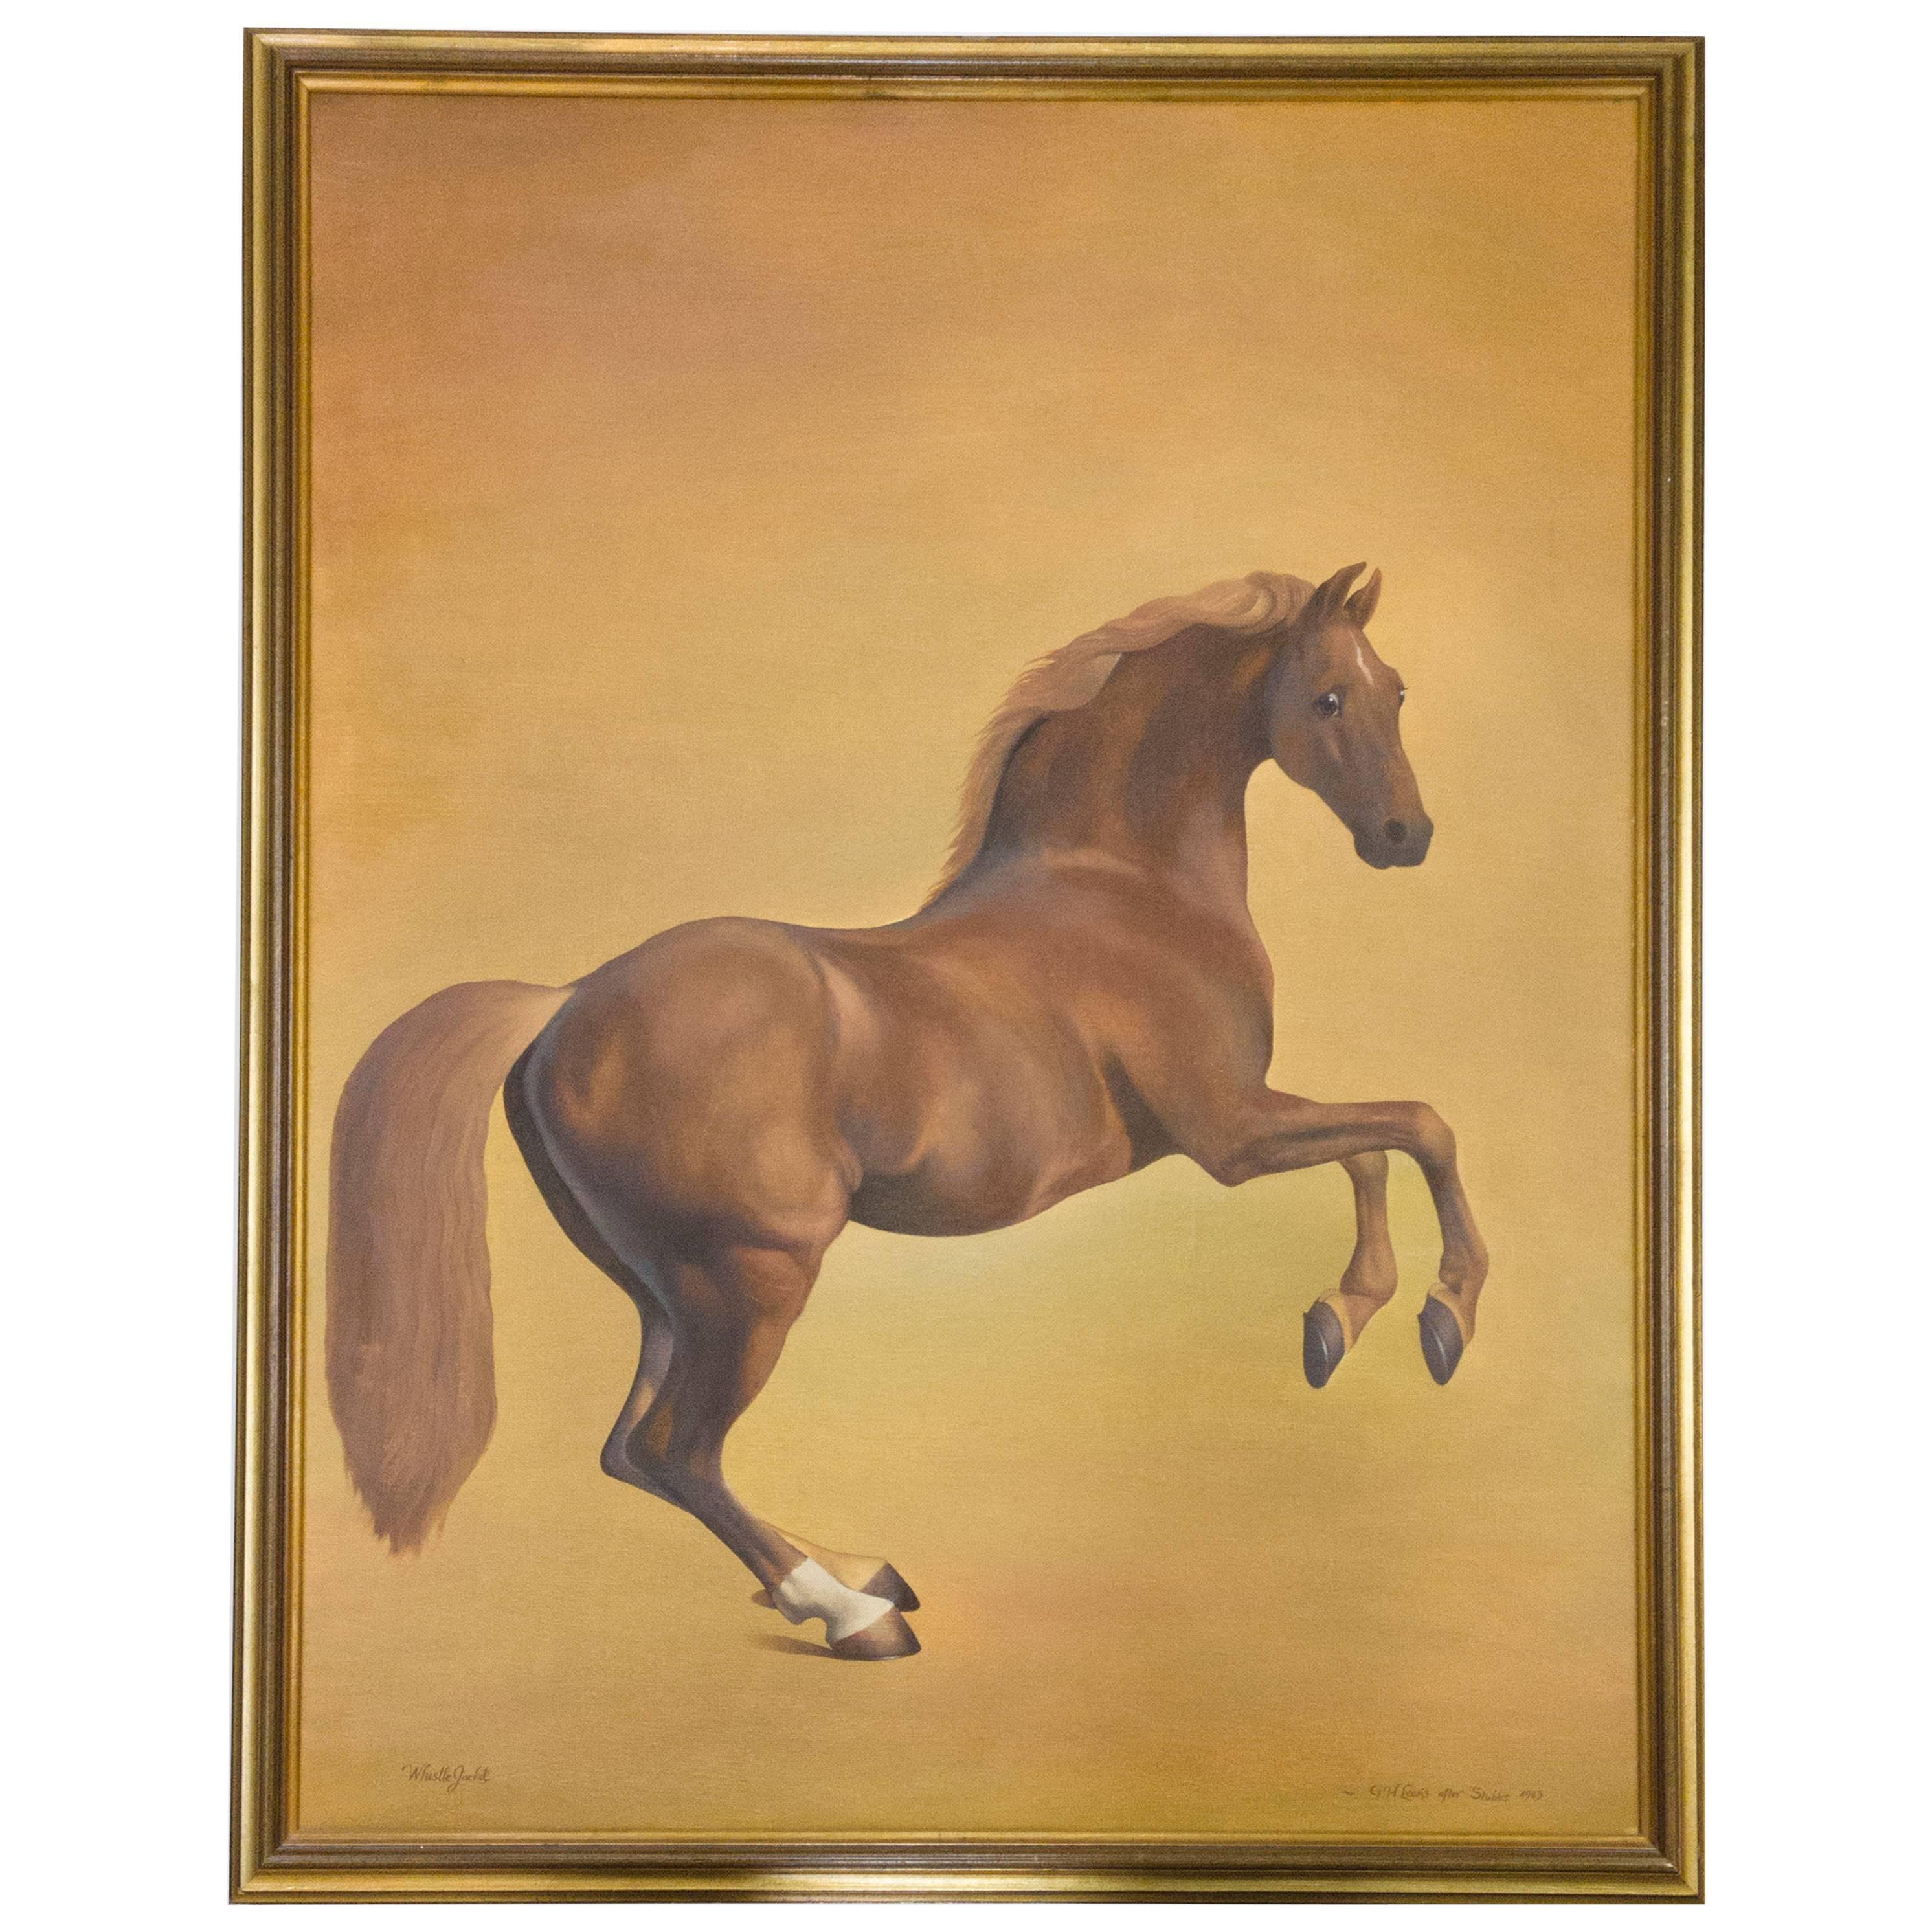 Whistle Jacket Horse Image on Canvas Painting, G. H. Lewis after George Stubbs